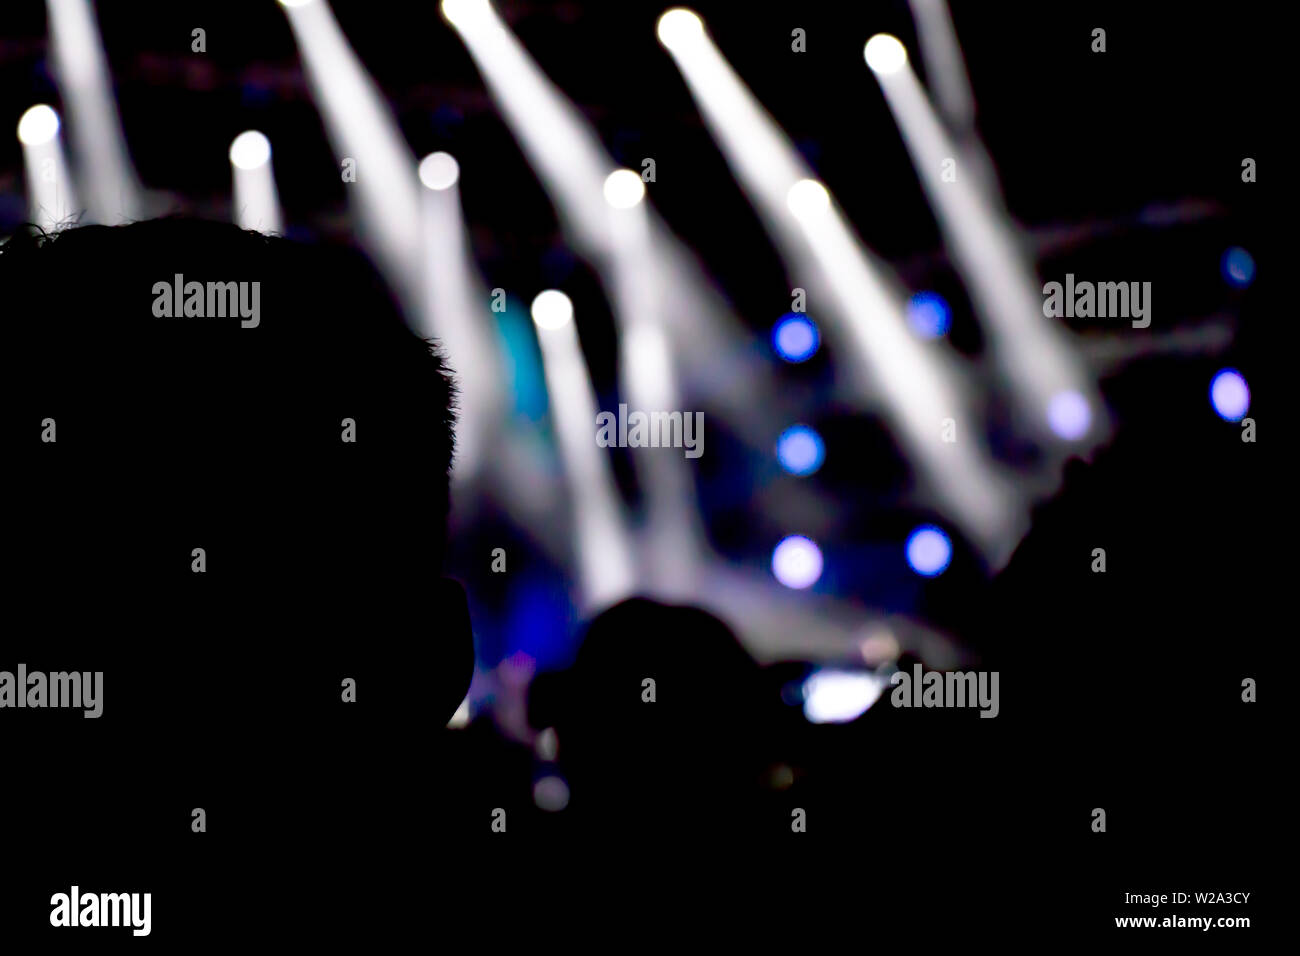 Silhouettes of people watching the concert from behind, with stage light in the distance Stock Photo